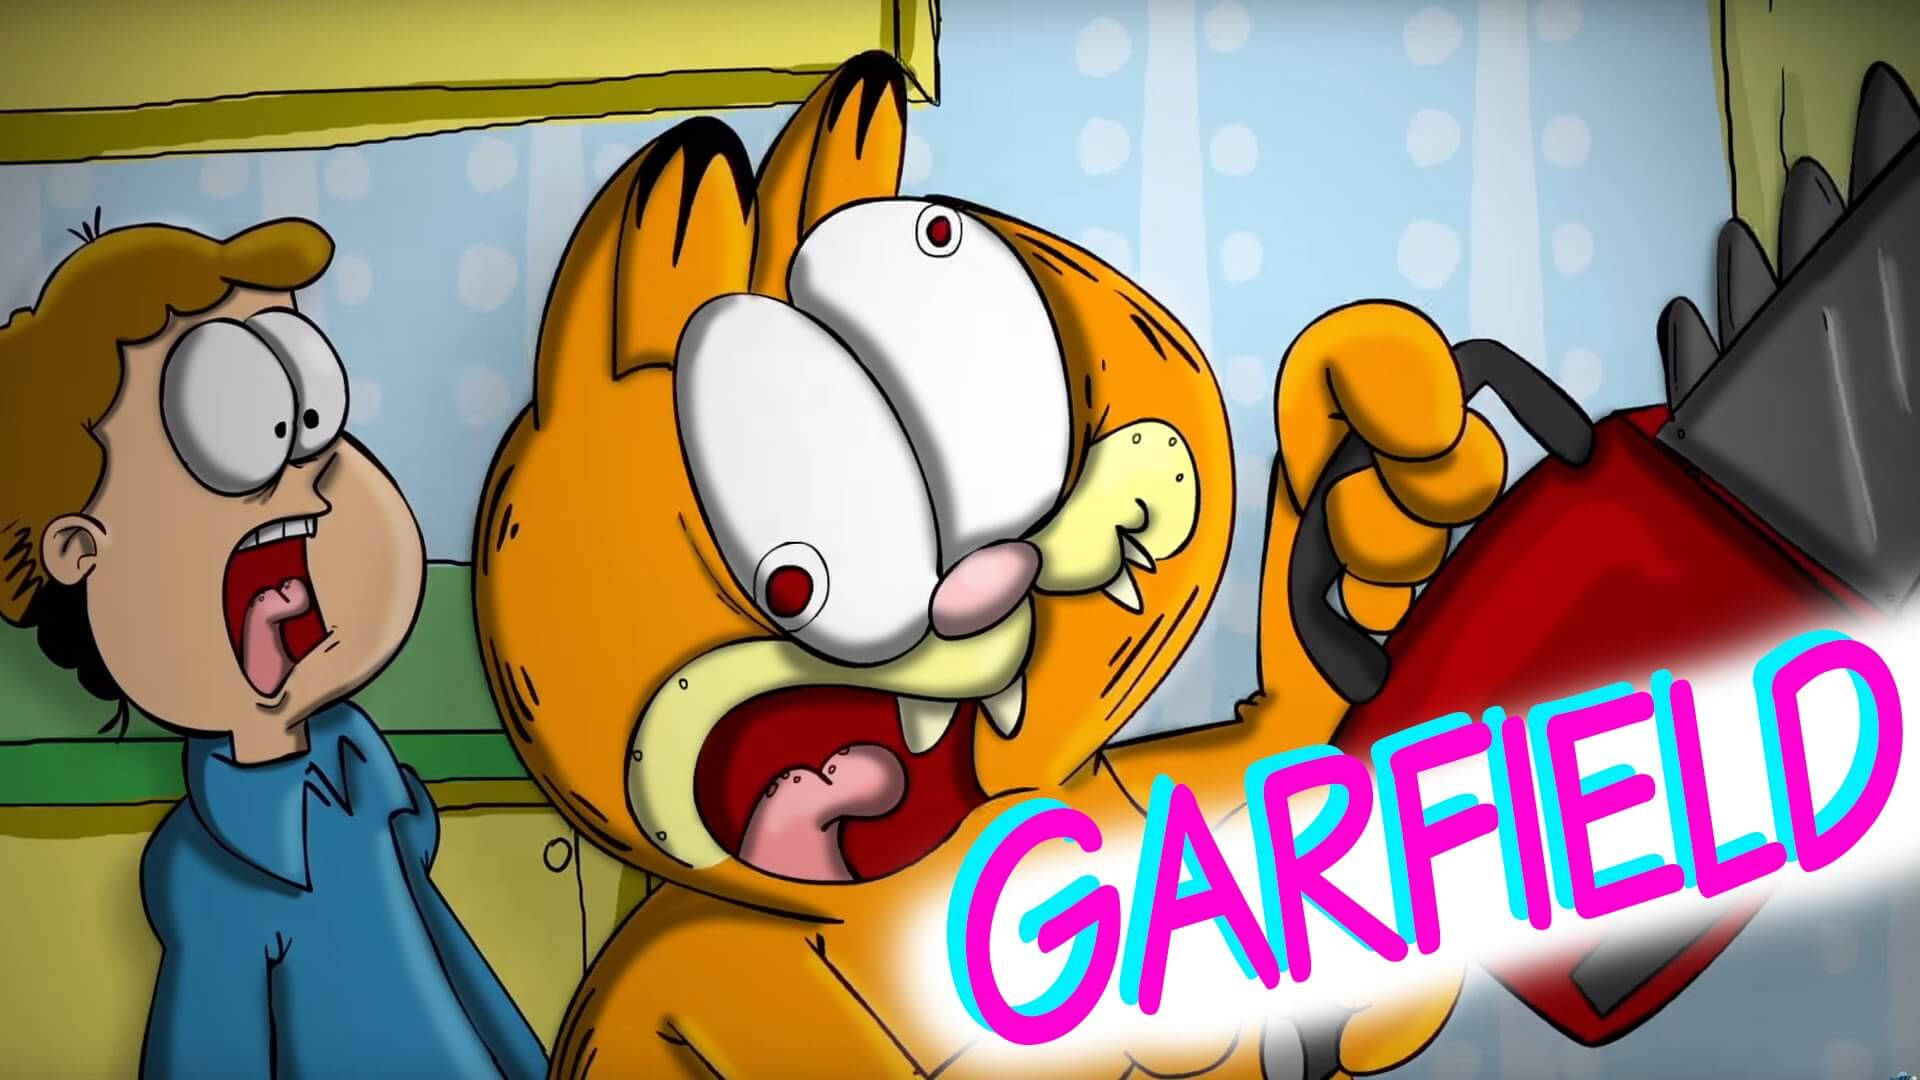 Jon And Garfield With Chainsaw Wallpaper